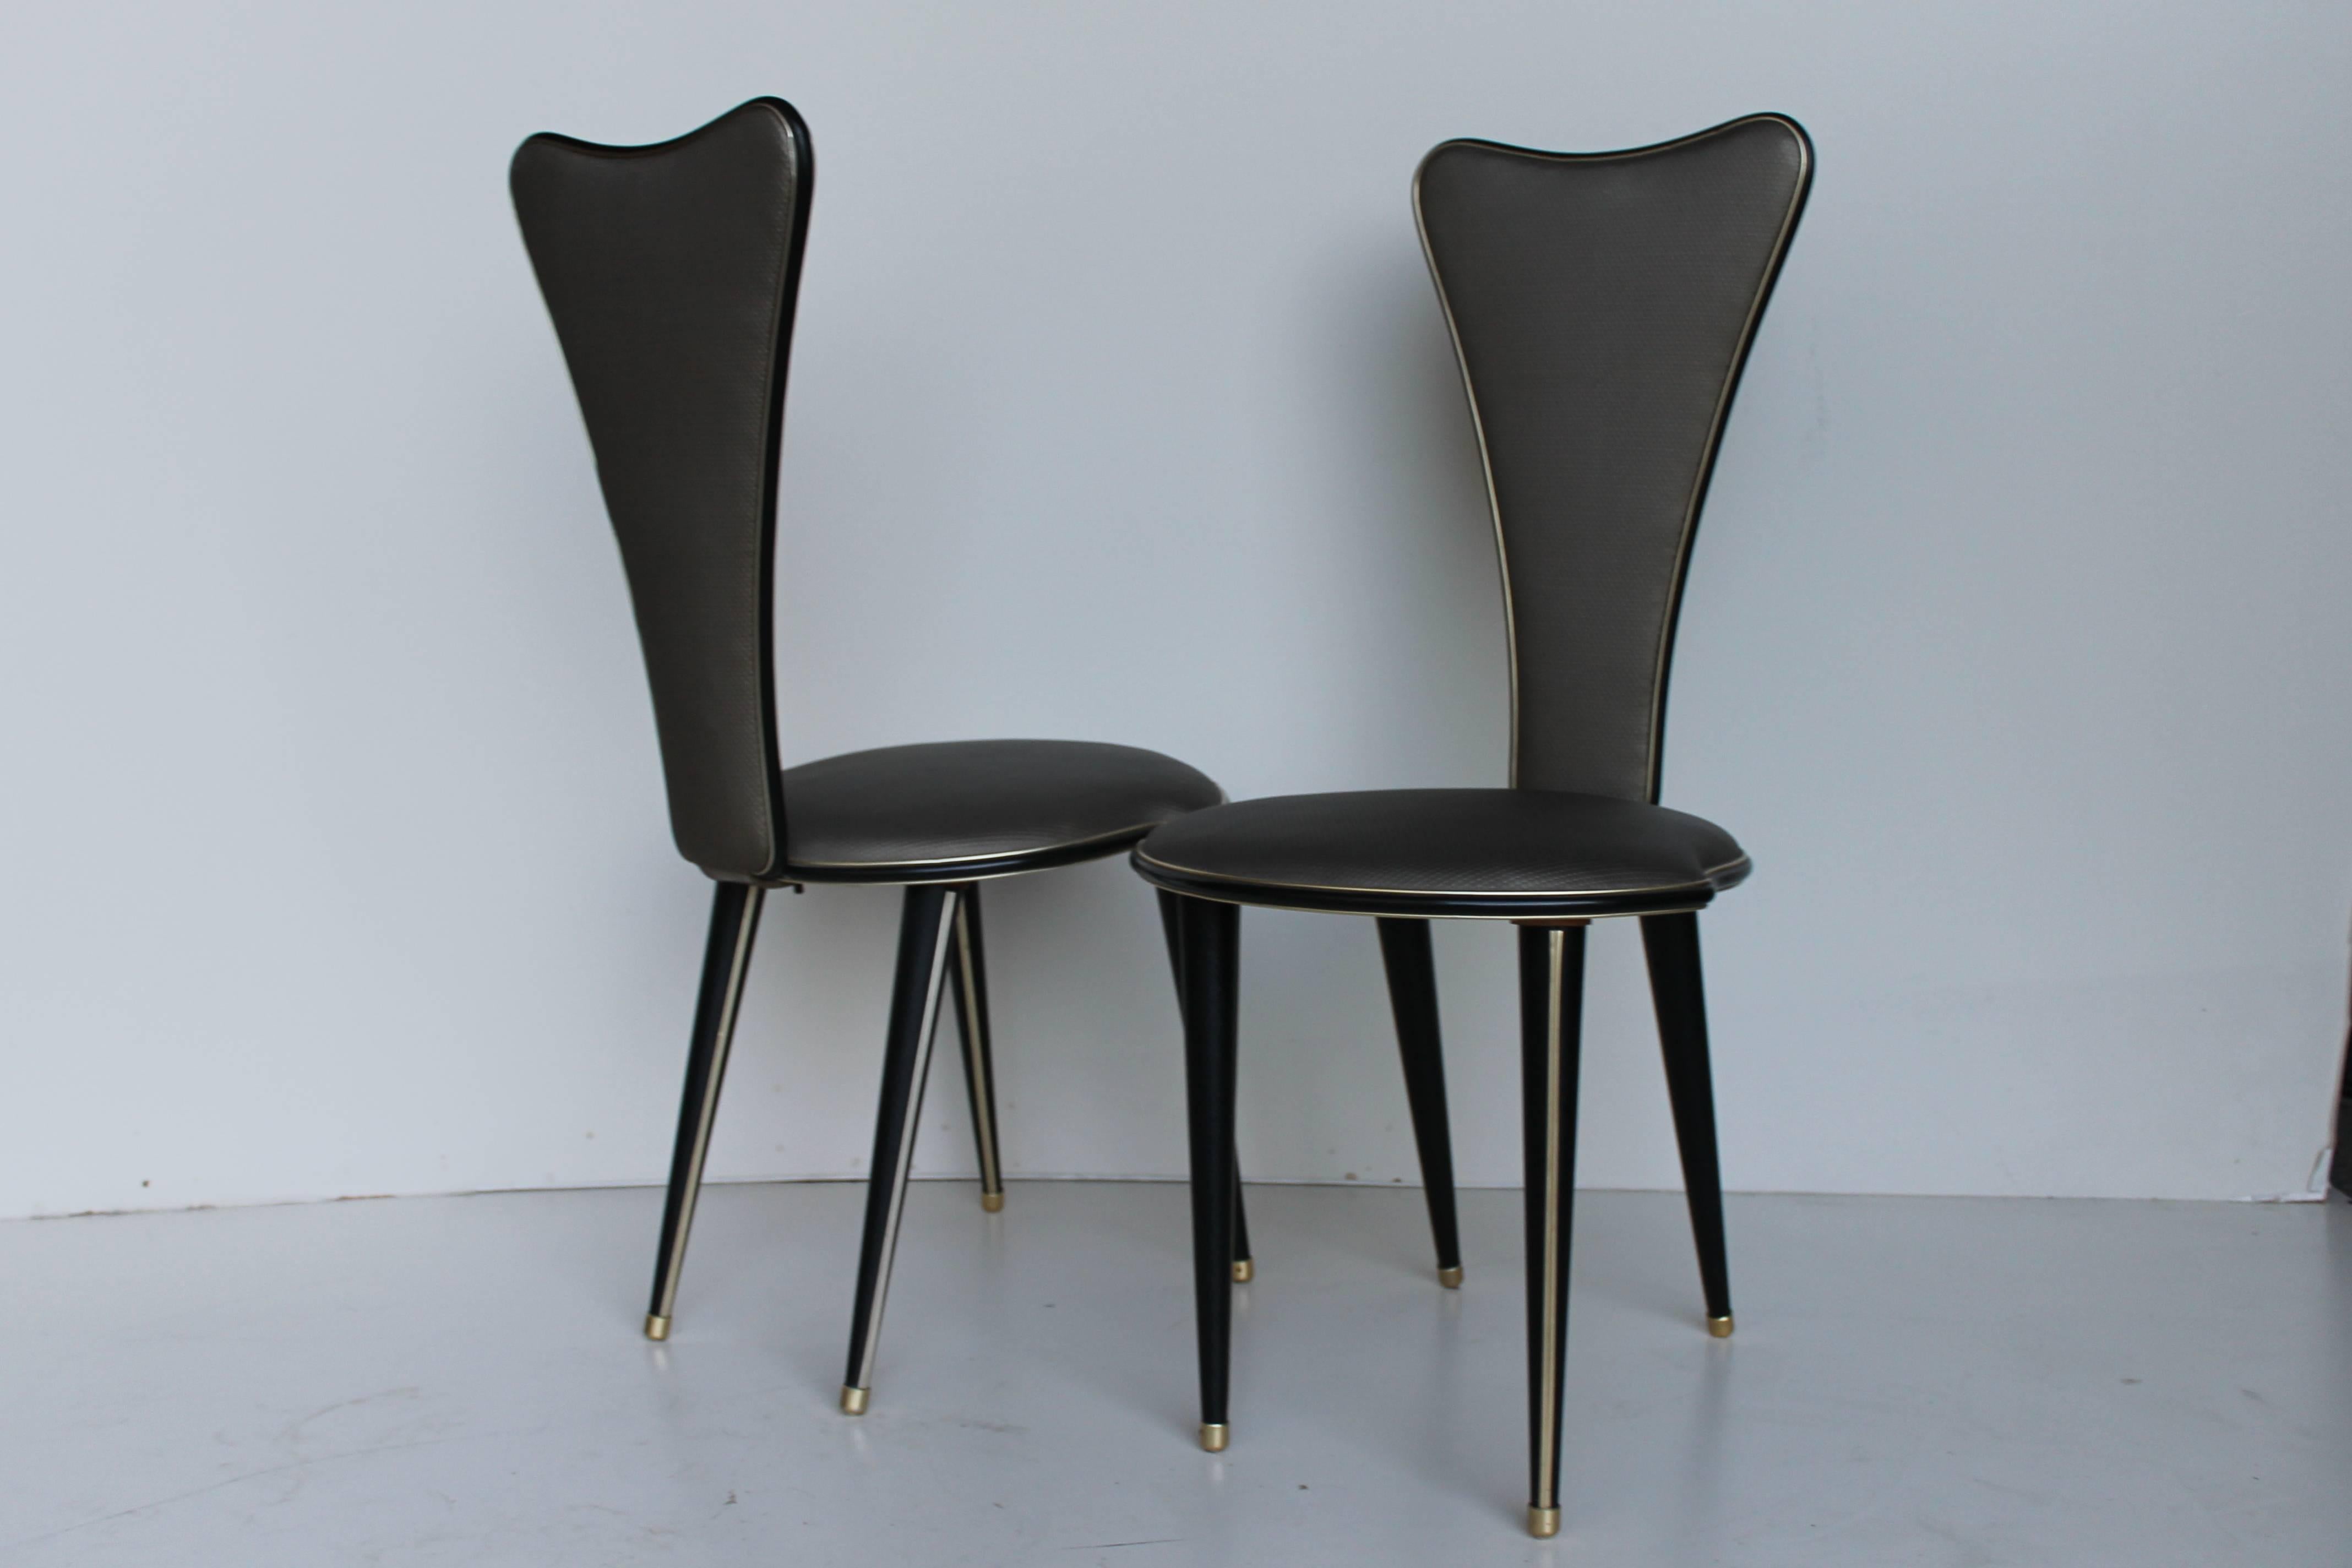 A set of four beautiful chairs designed by Umberto Mascagni for Harrods.

Another set of four chair (lower seat) available.